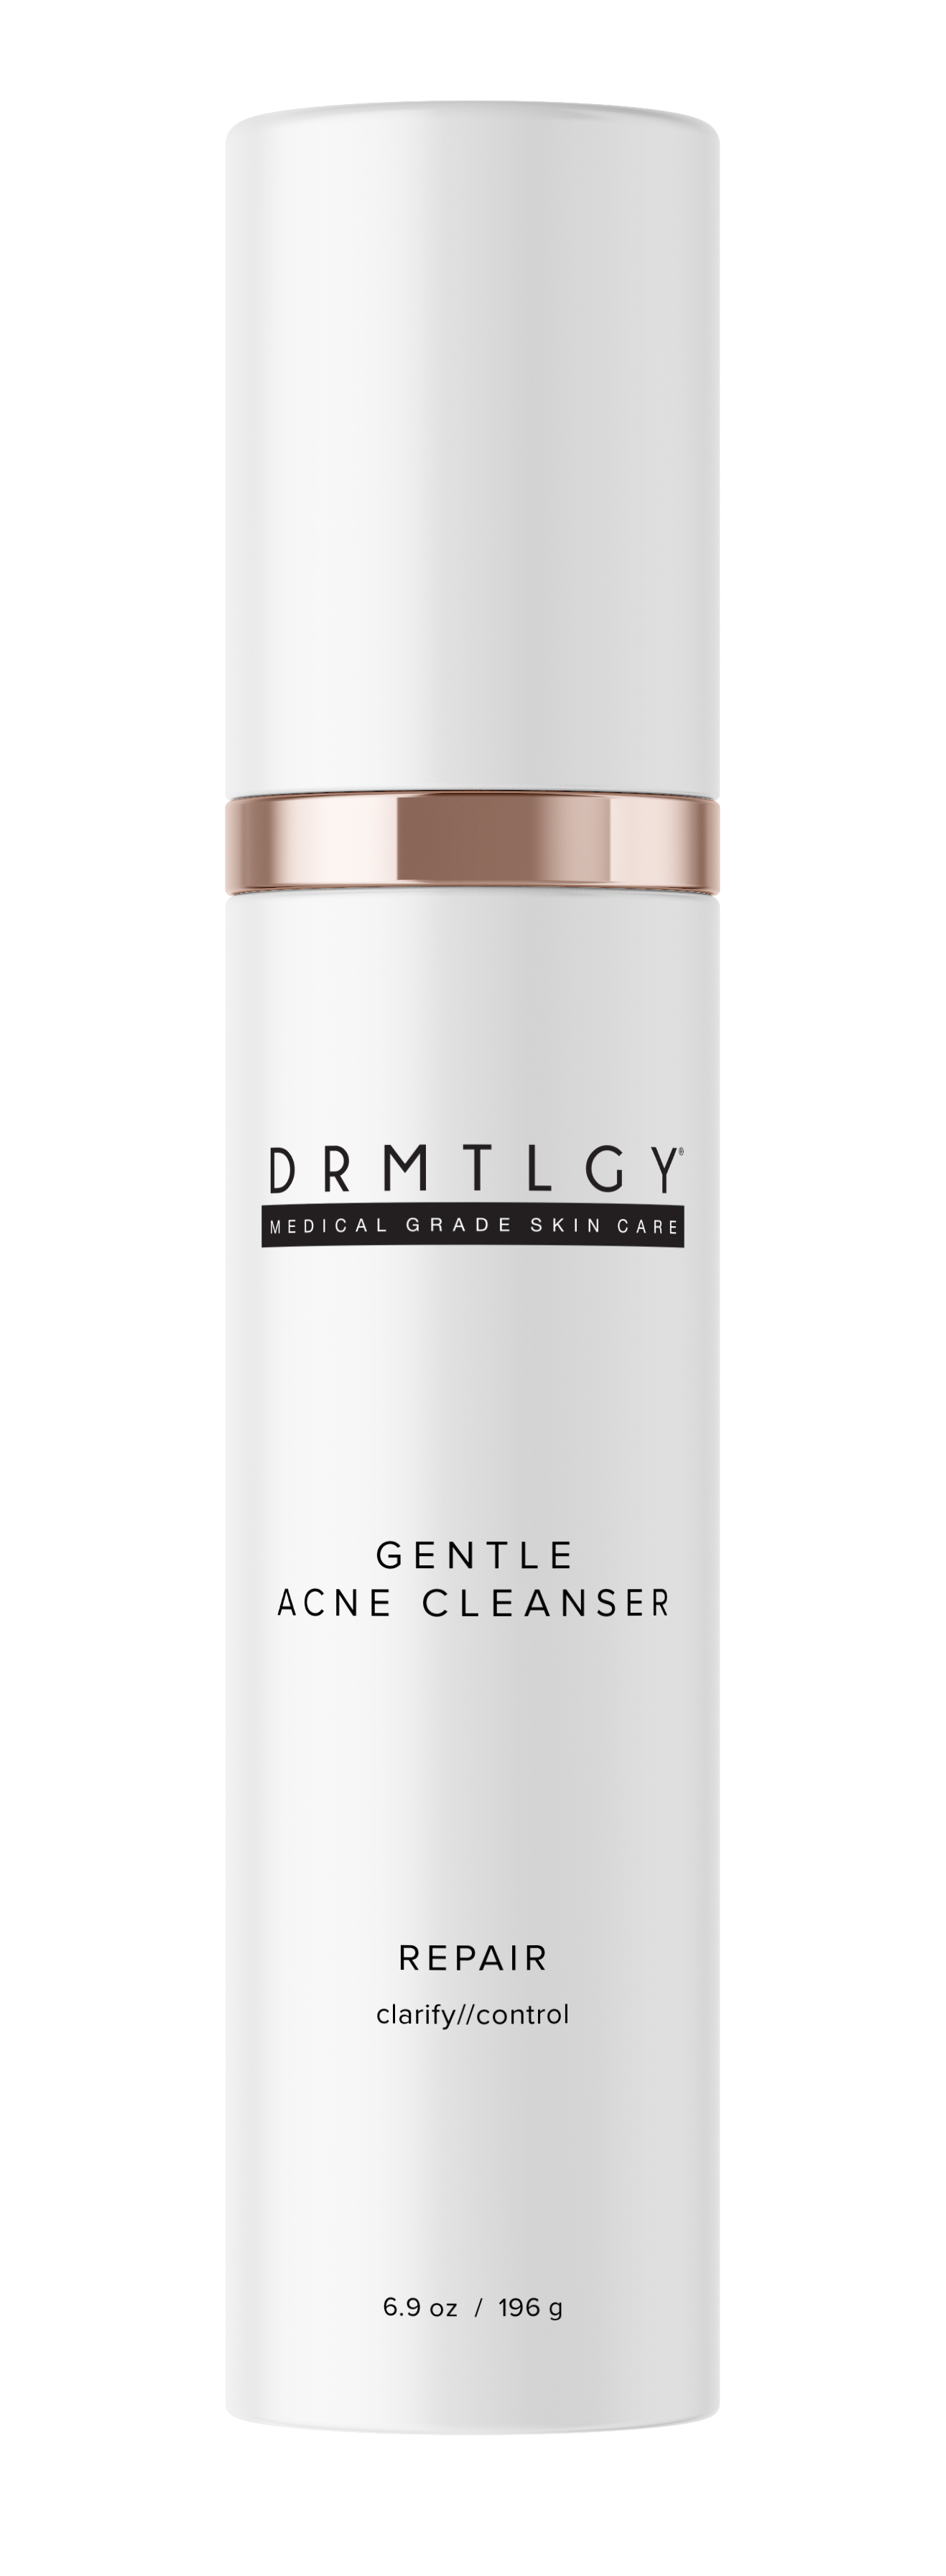 DRMTLGY - Gentle Acne Cleanser